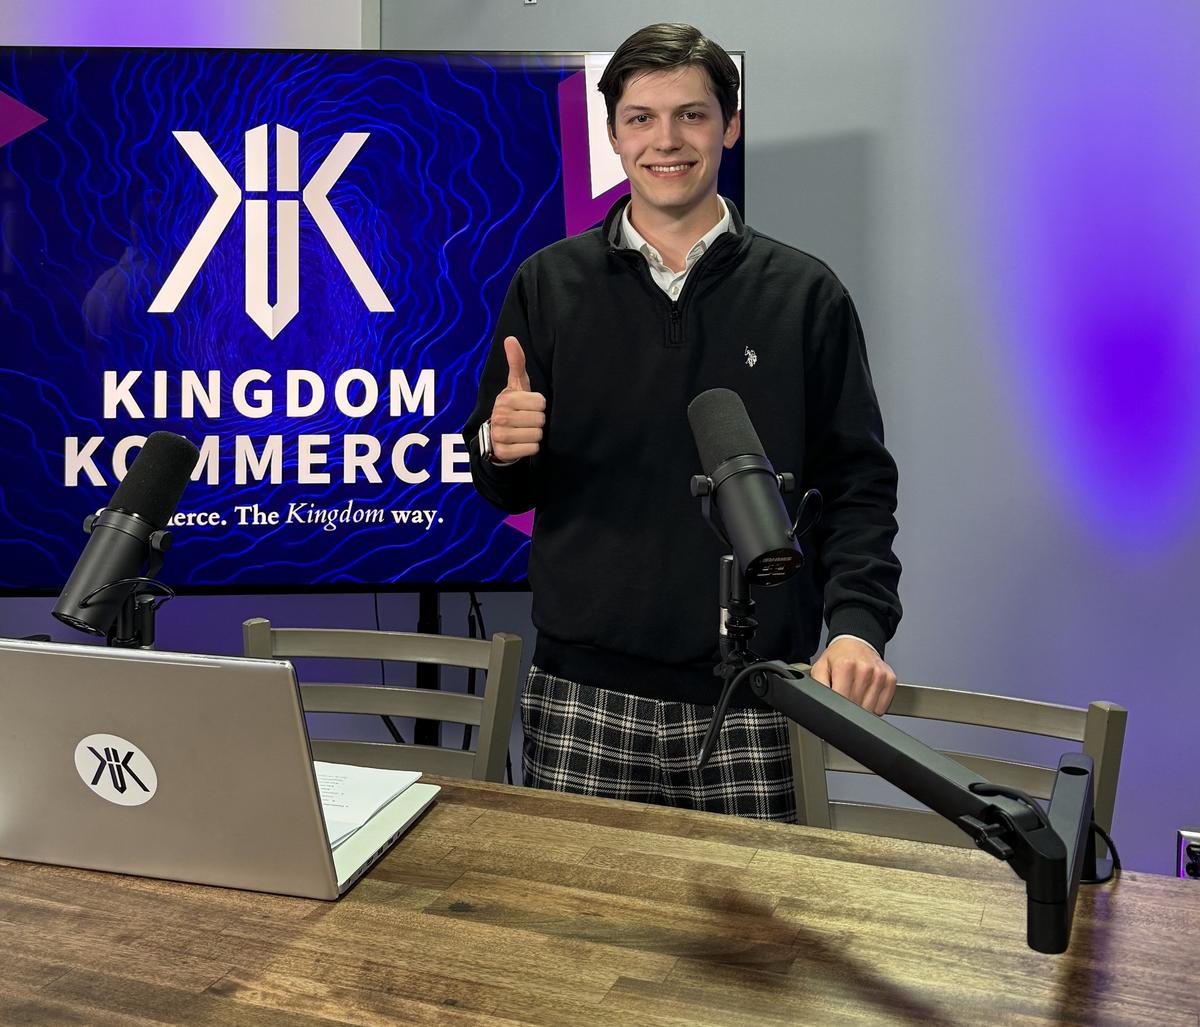 Will Woods on the Kingdom Kommerce podcast